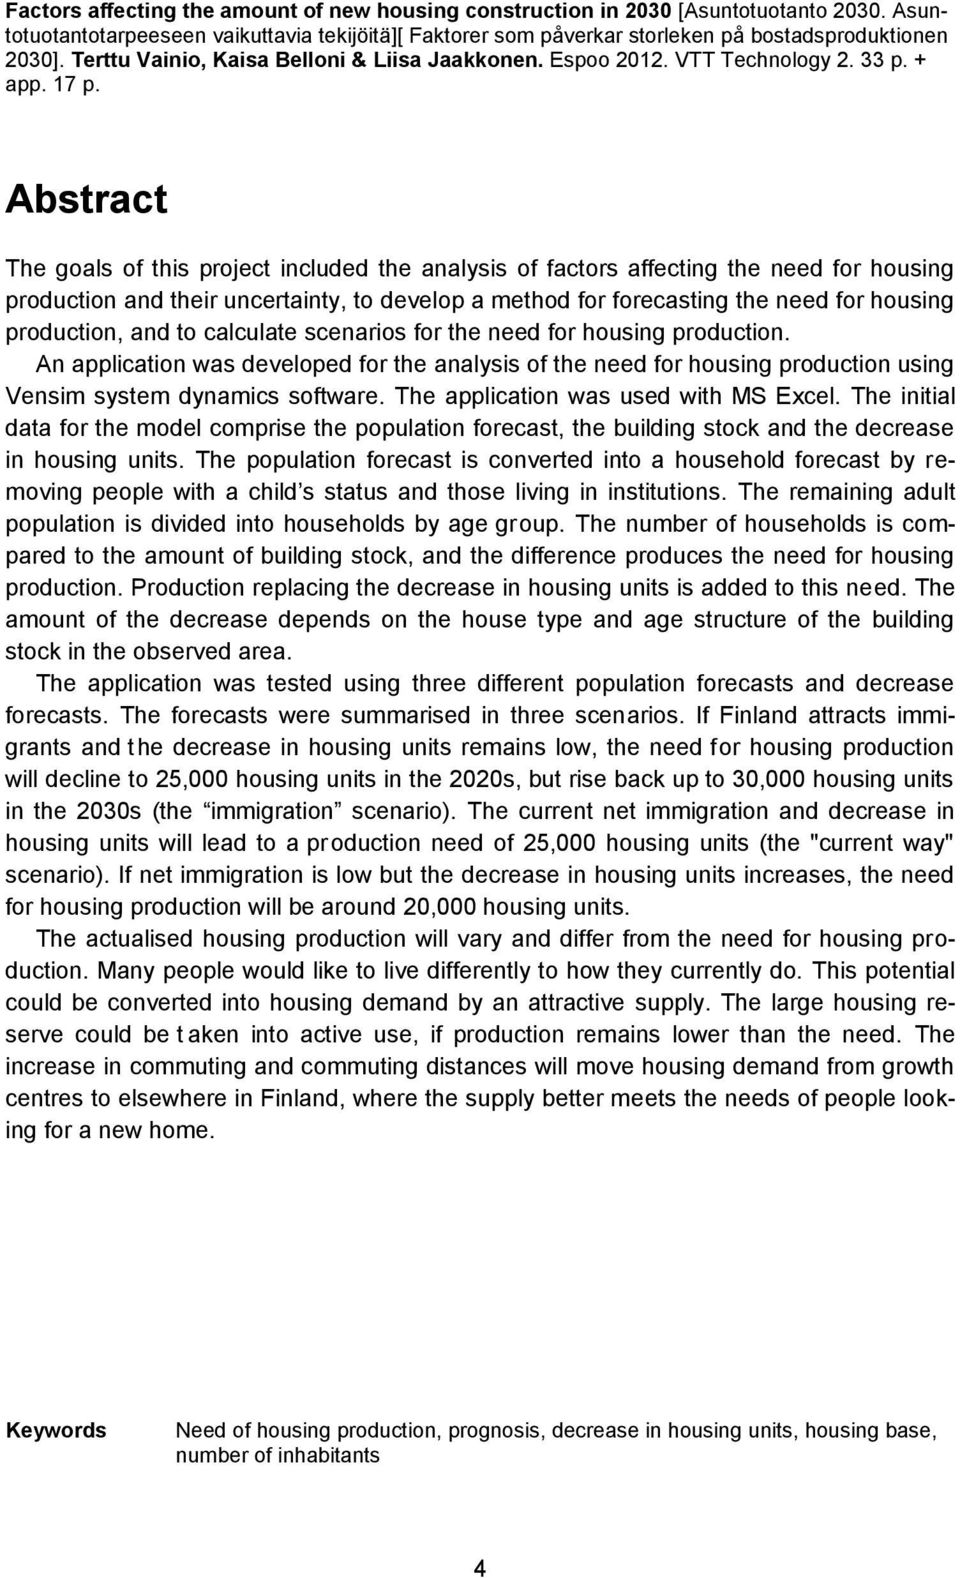 Abstract The goals of this project included the analysis of factors affecting the need for housing production and their uncertainty, to develop a method for forecasting the need for housing